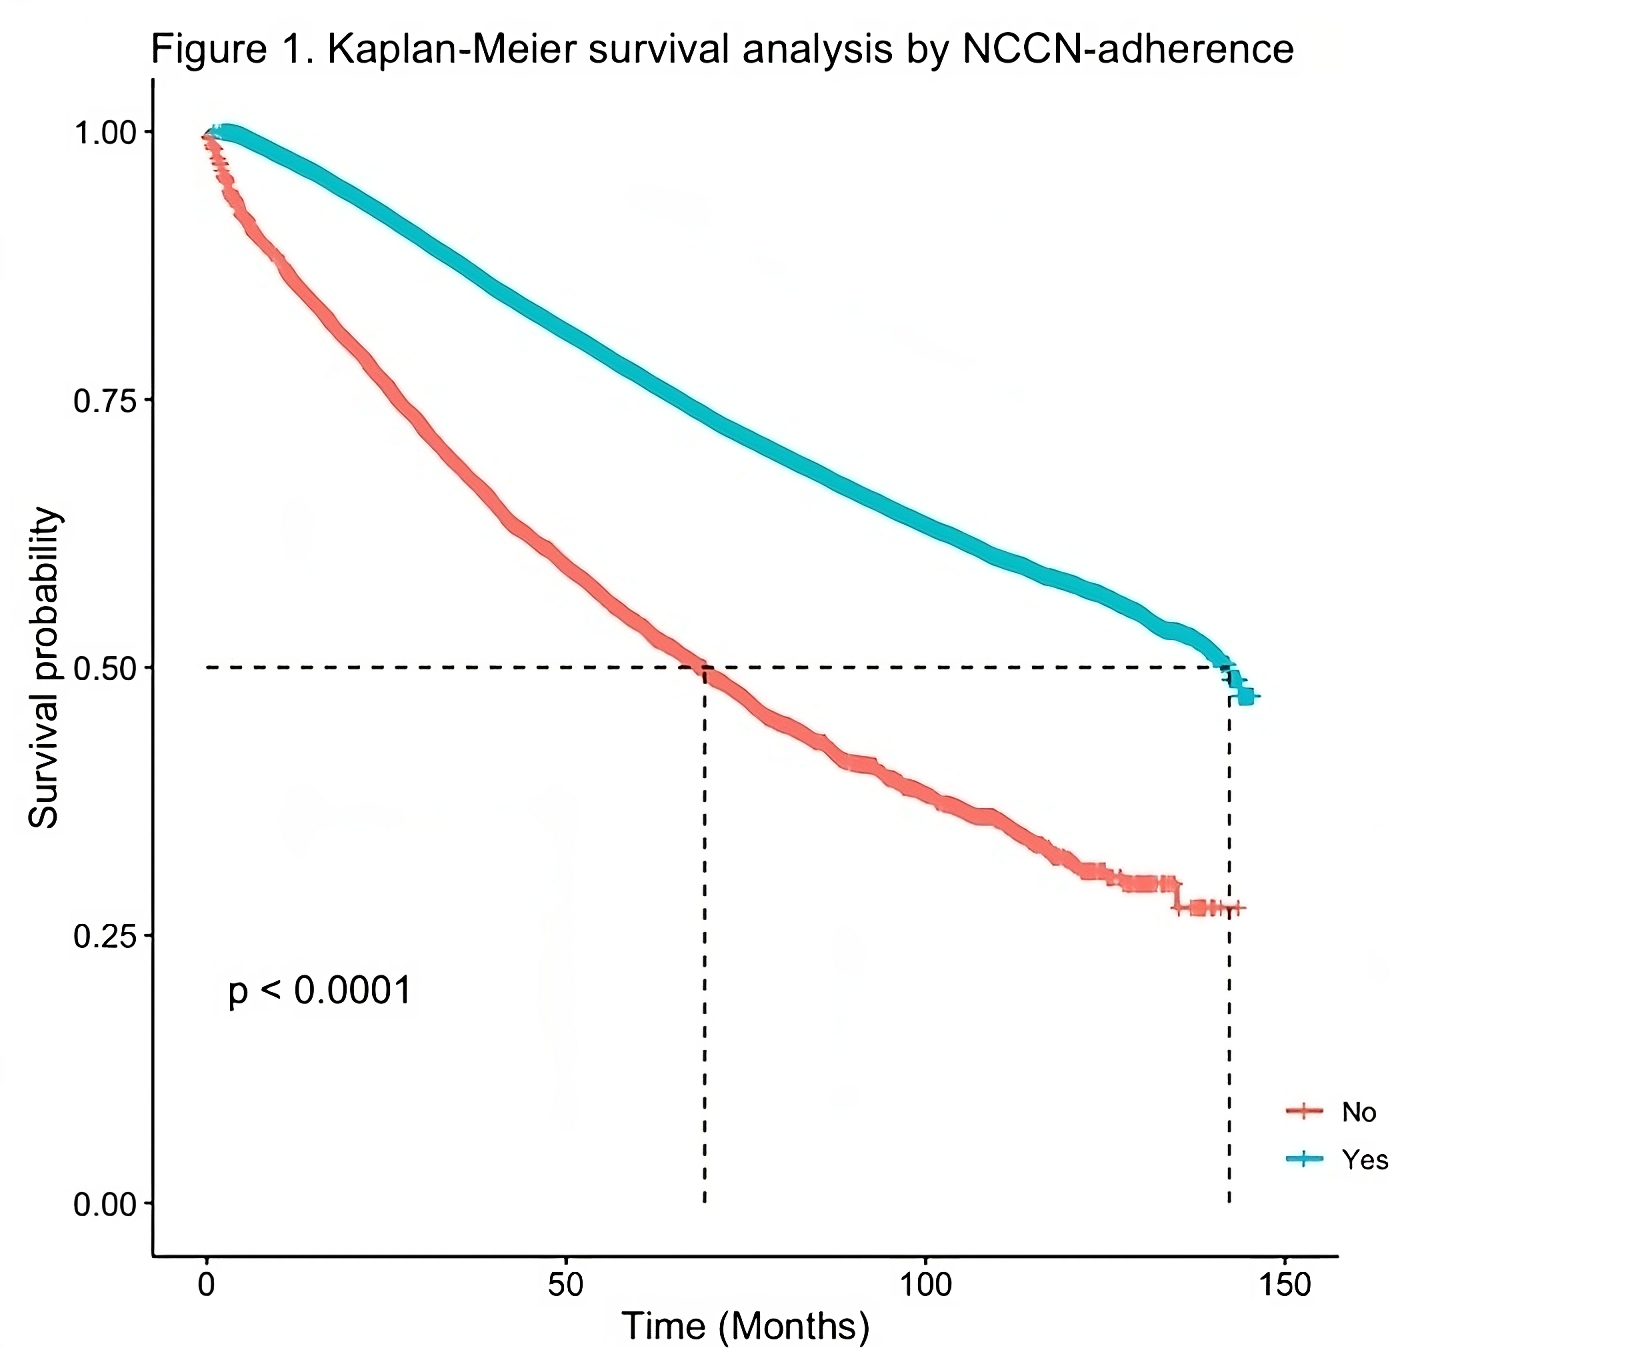 Graph of Kaplan-Meier curve with y-axis survival probability, x-axis months, lower red line denoting no NCCN adherence, and upper teal line denoting NCCN adherence